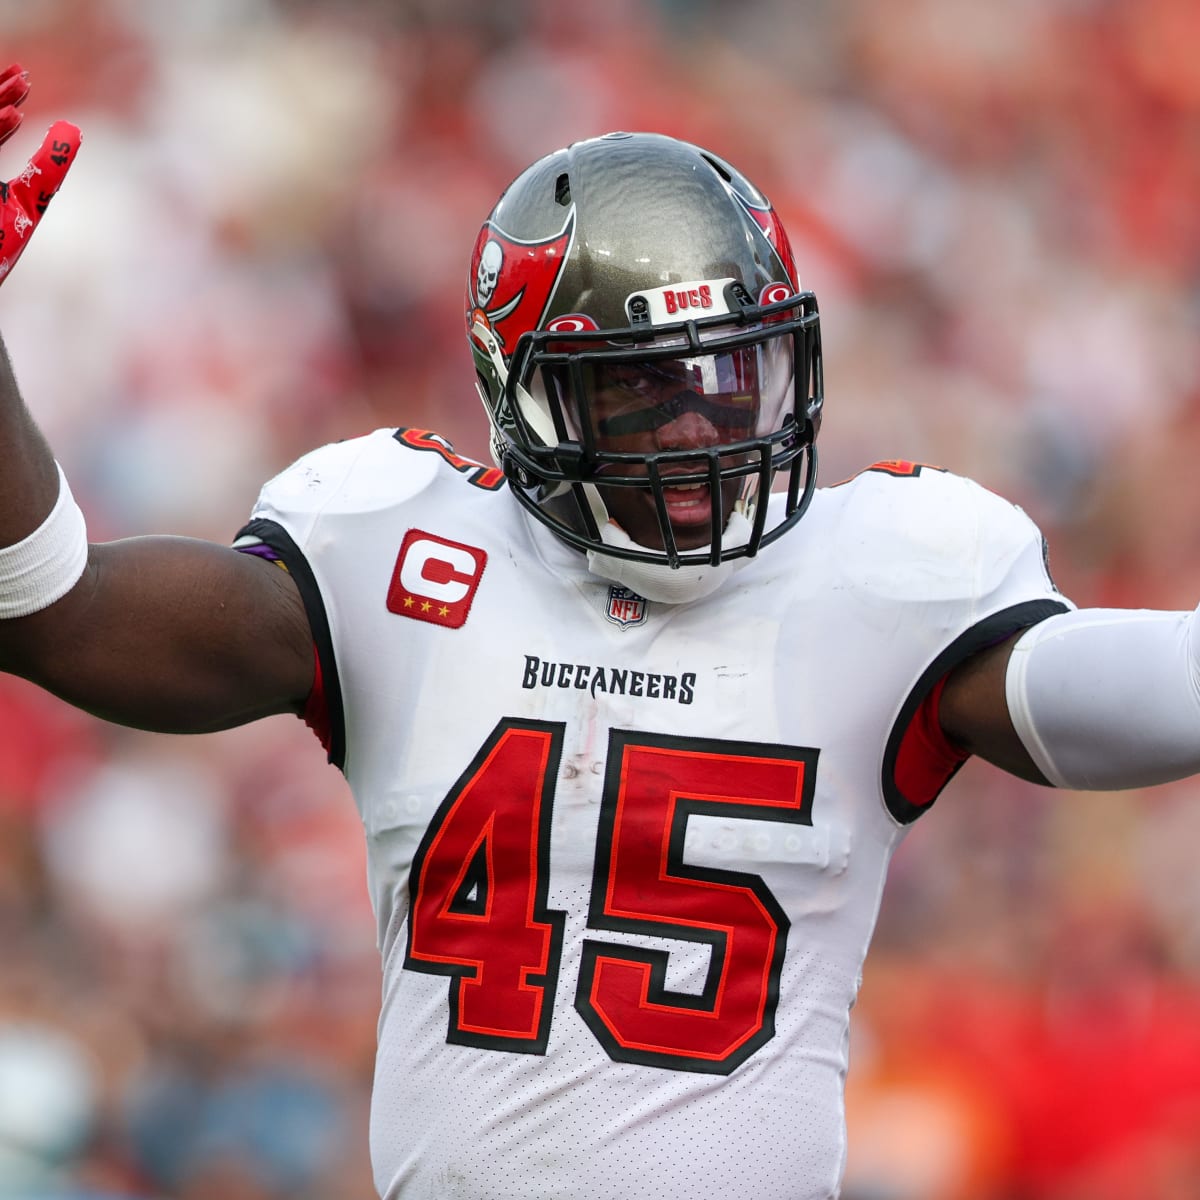 Unavailable Listing on   Tampa bay buccaneers, Tampa bay football,  Tampa bay bucs